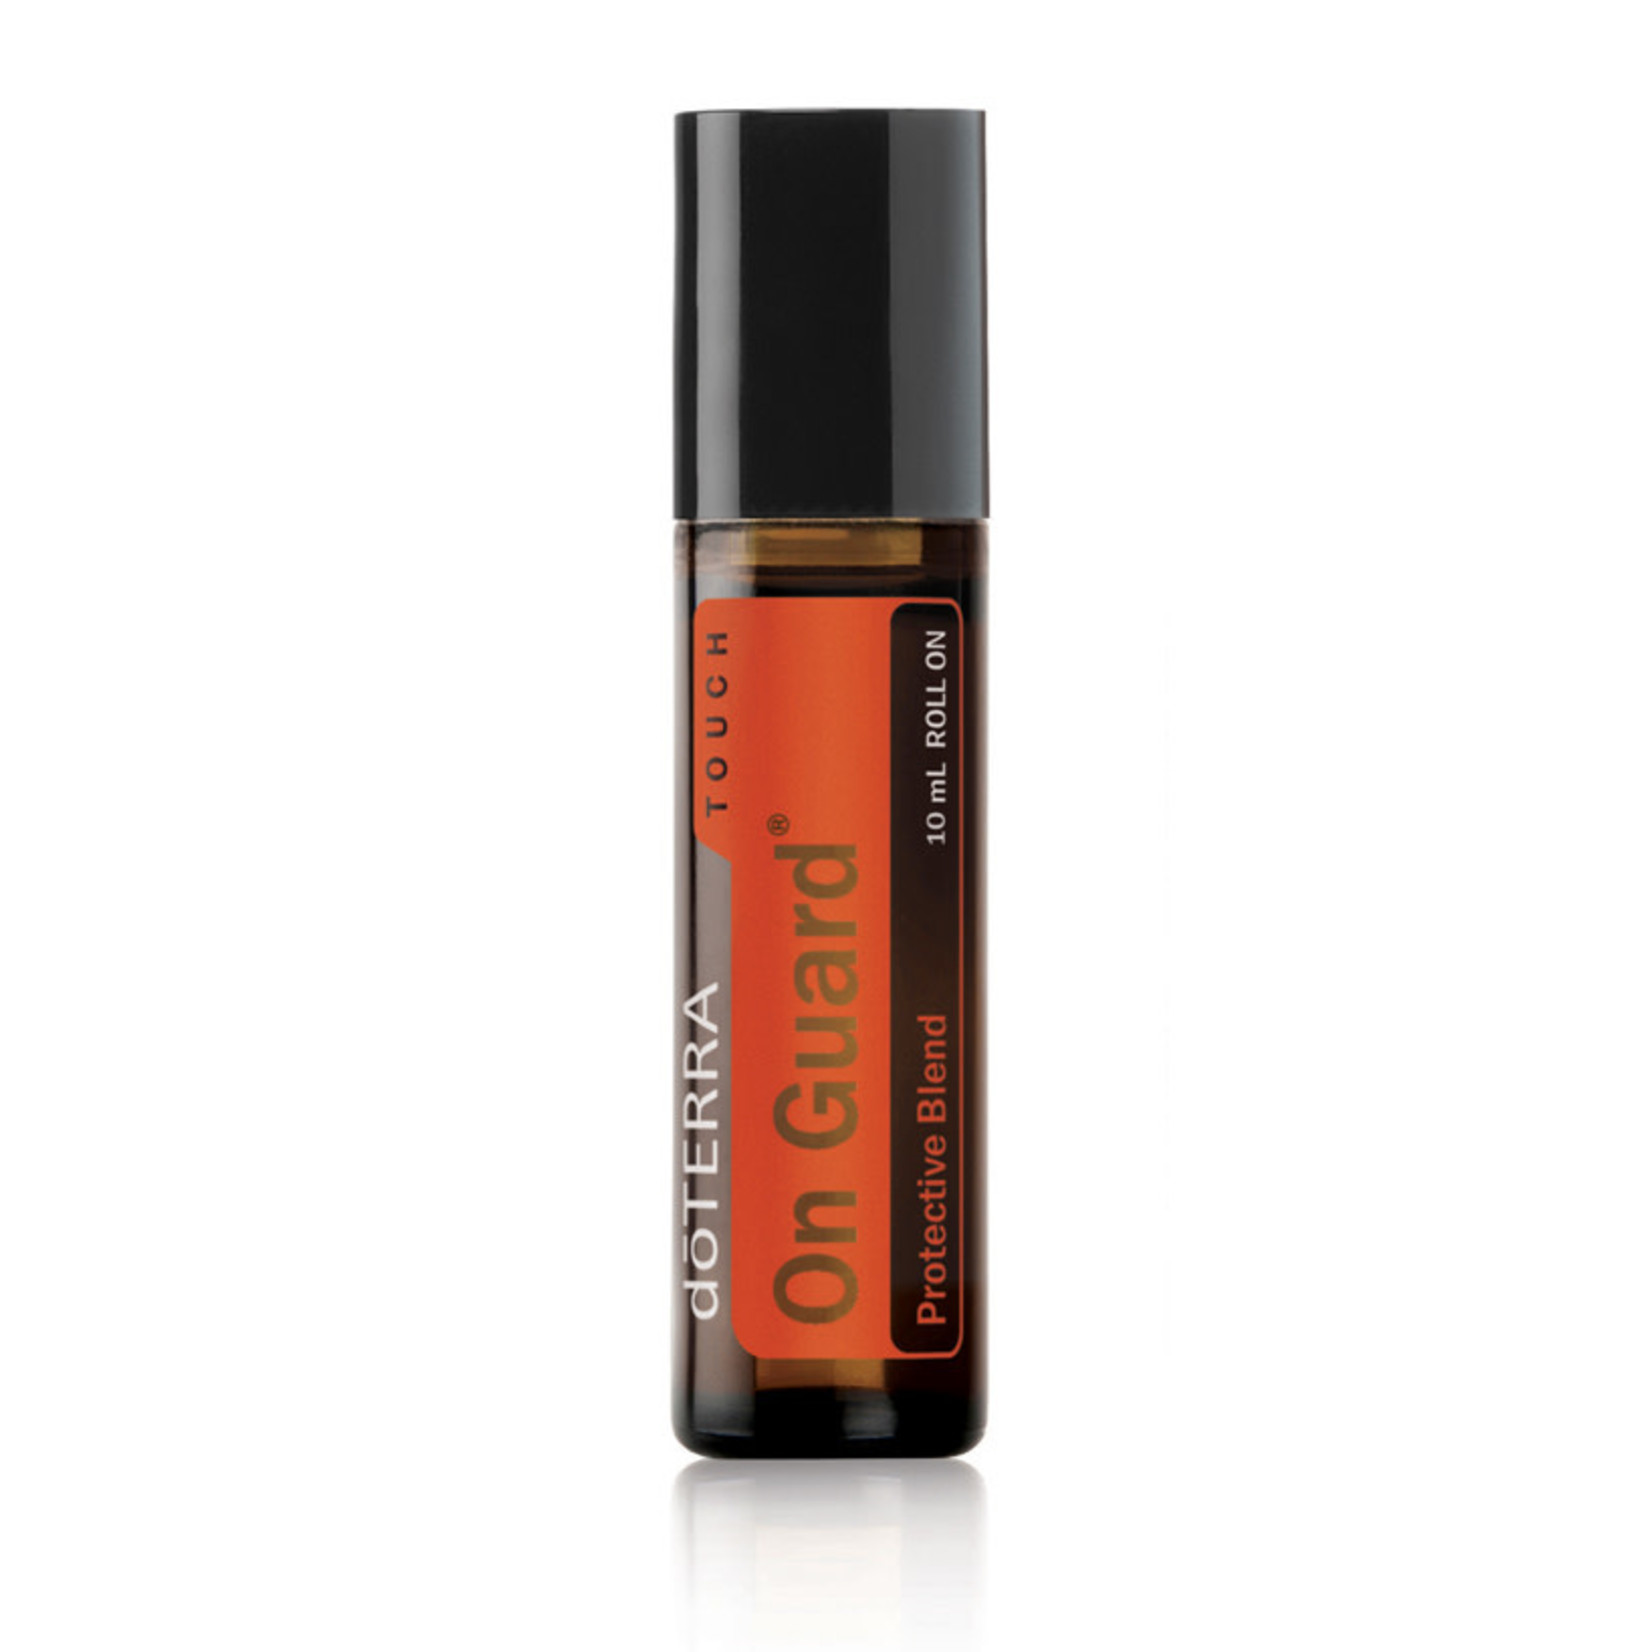 doTERRA doTerra On Guard Touch Roll On 10ml